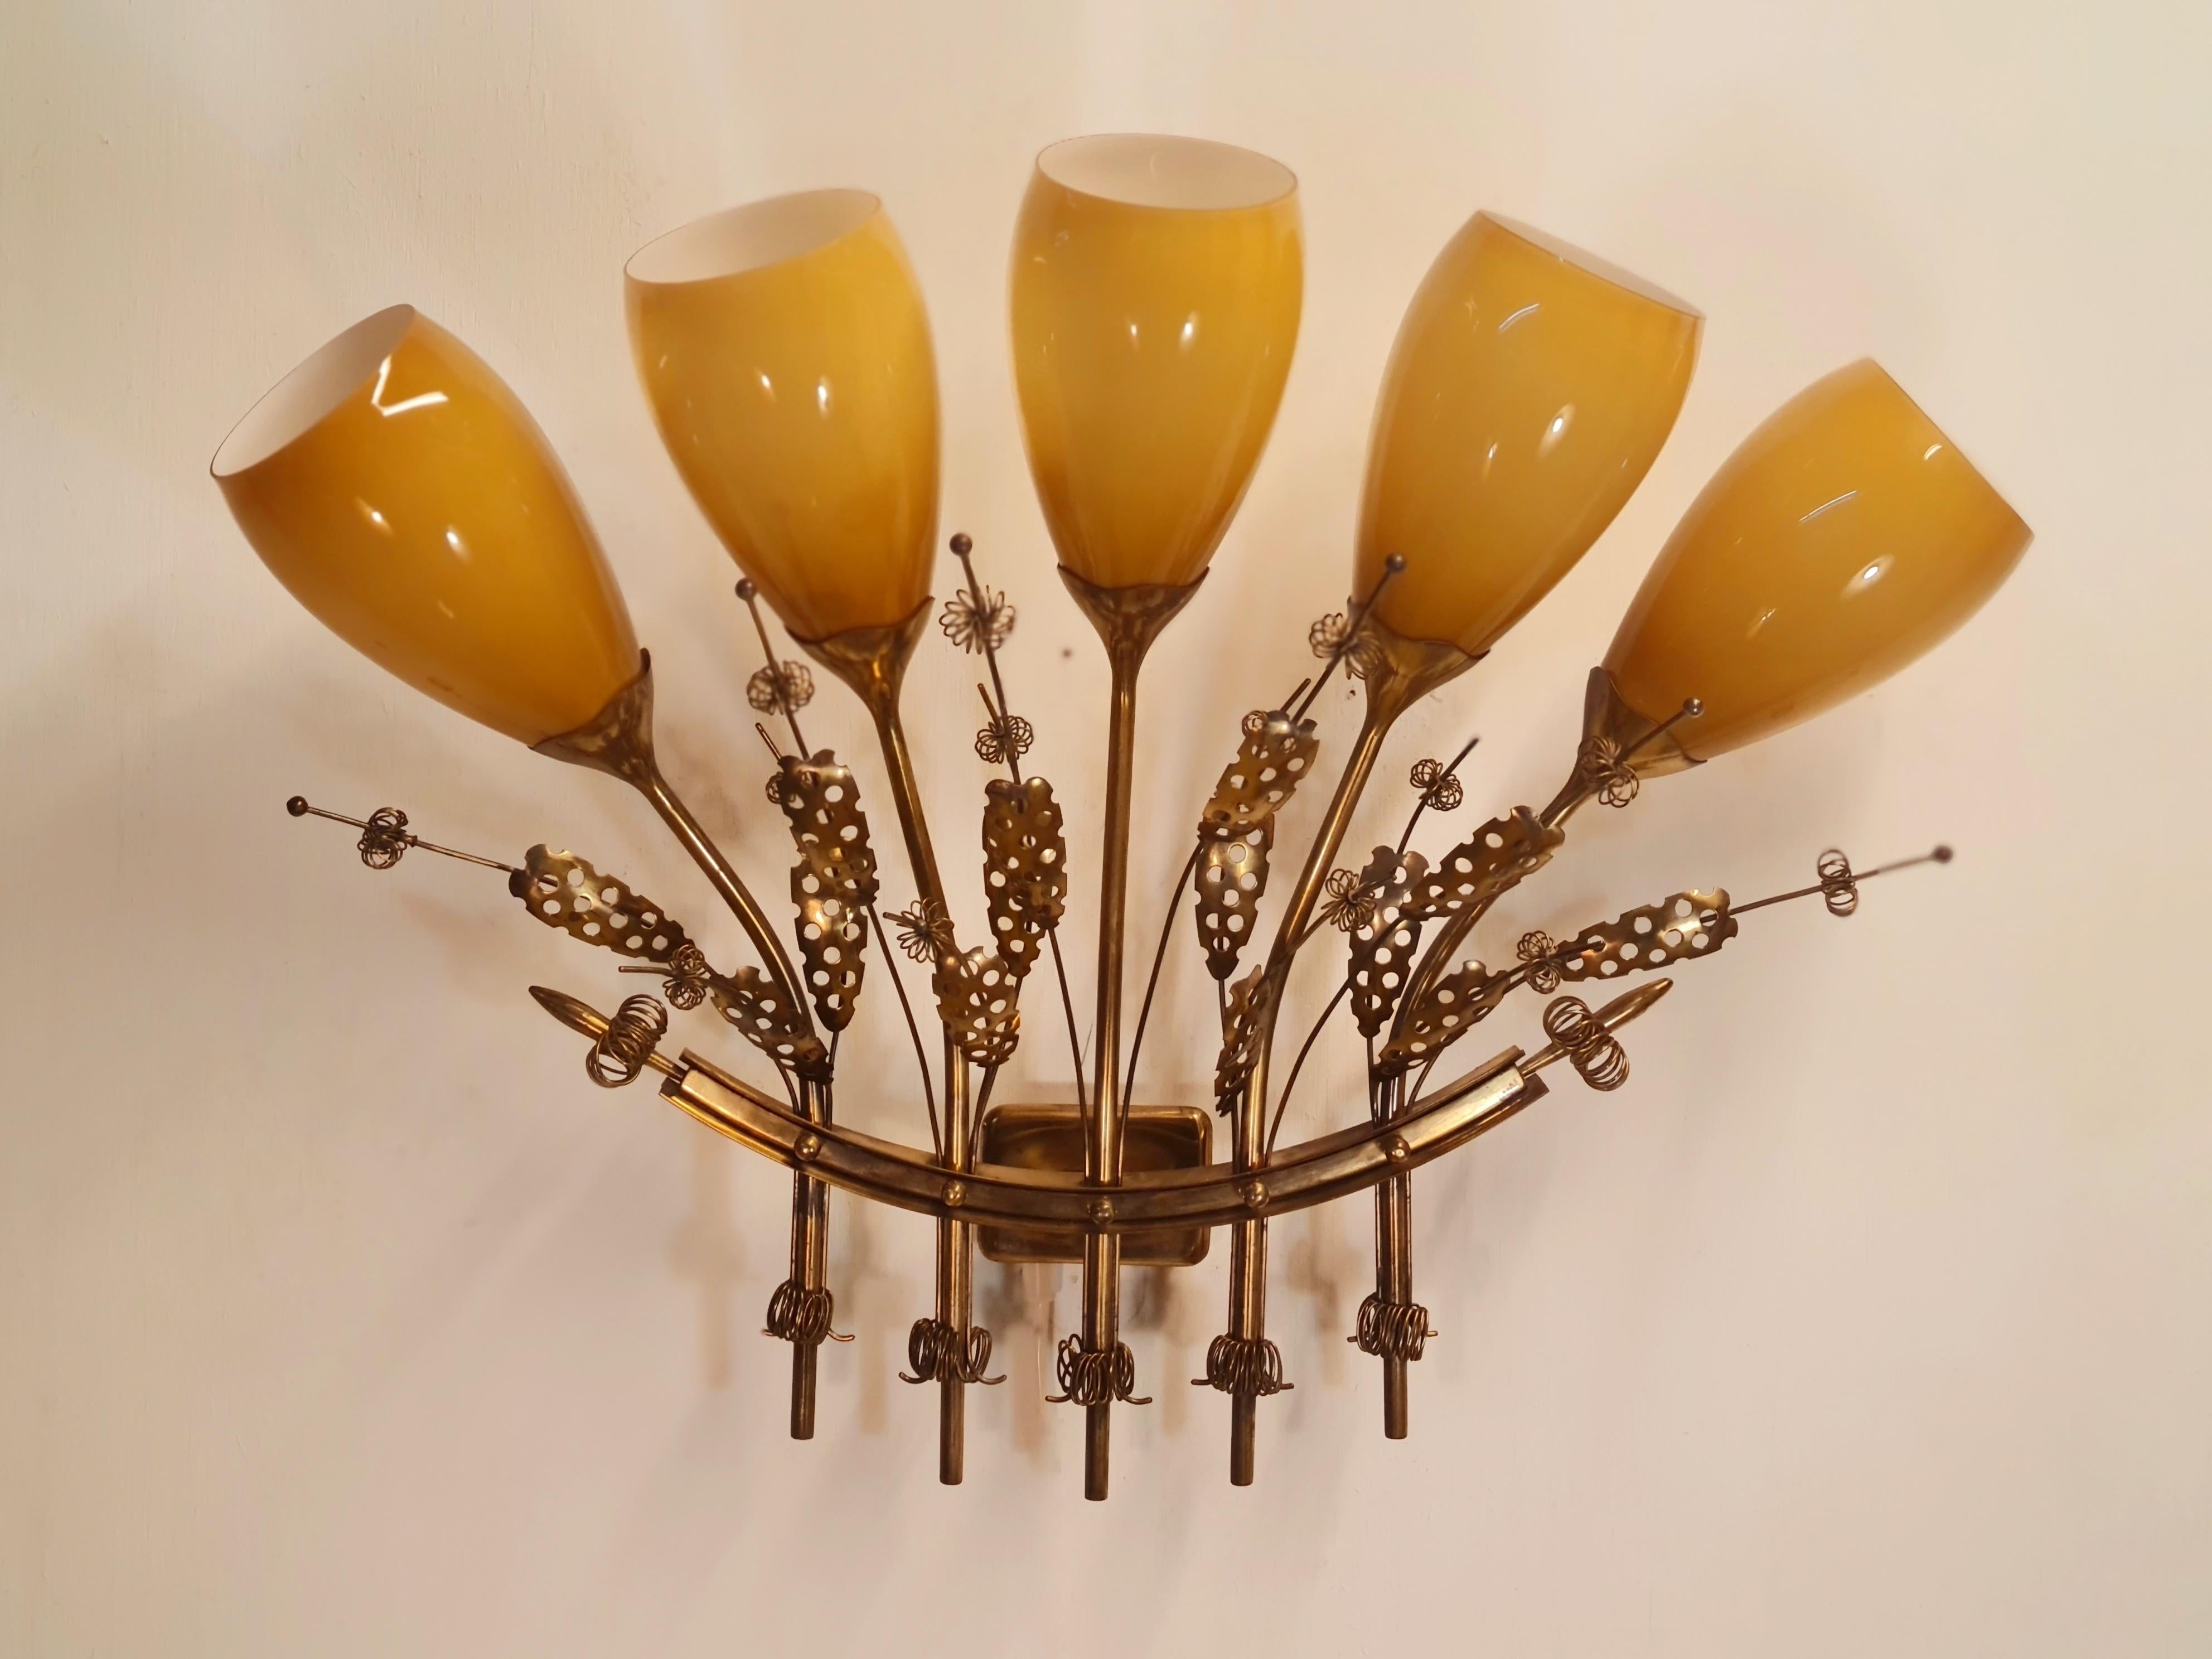 A Pair of Impressive Paavo Tynell Commissioned Wall Lamps, Taito c. 1950s For Sale 8